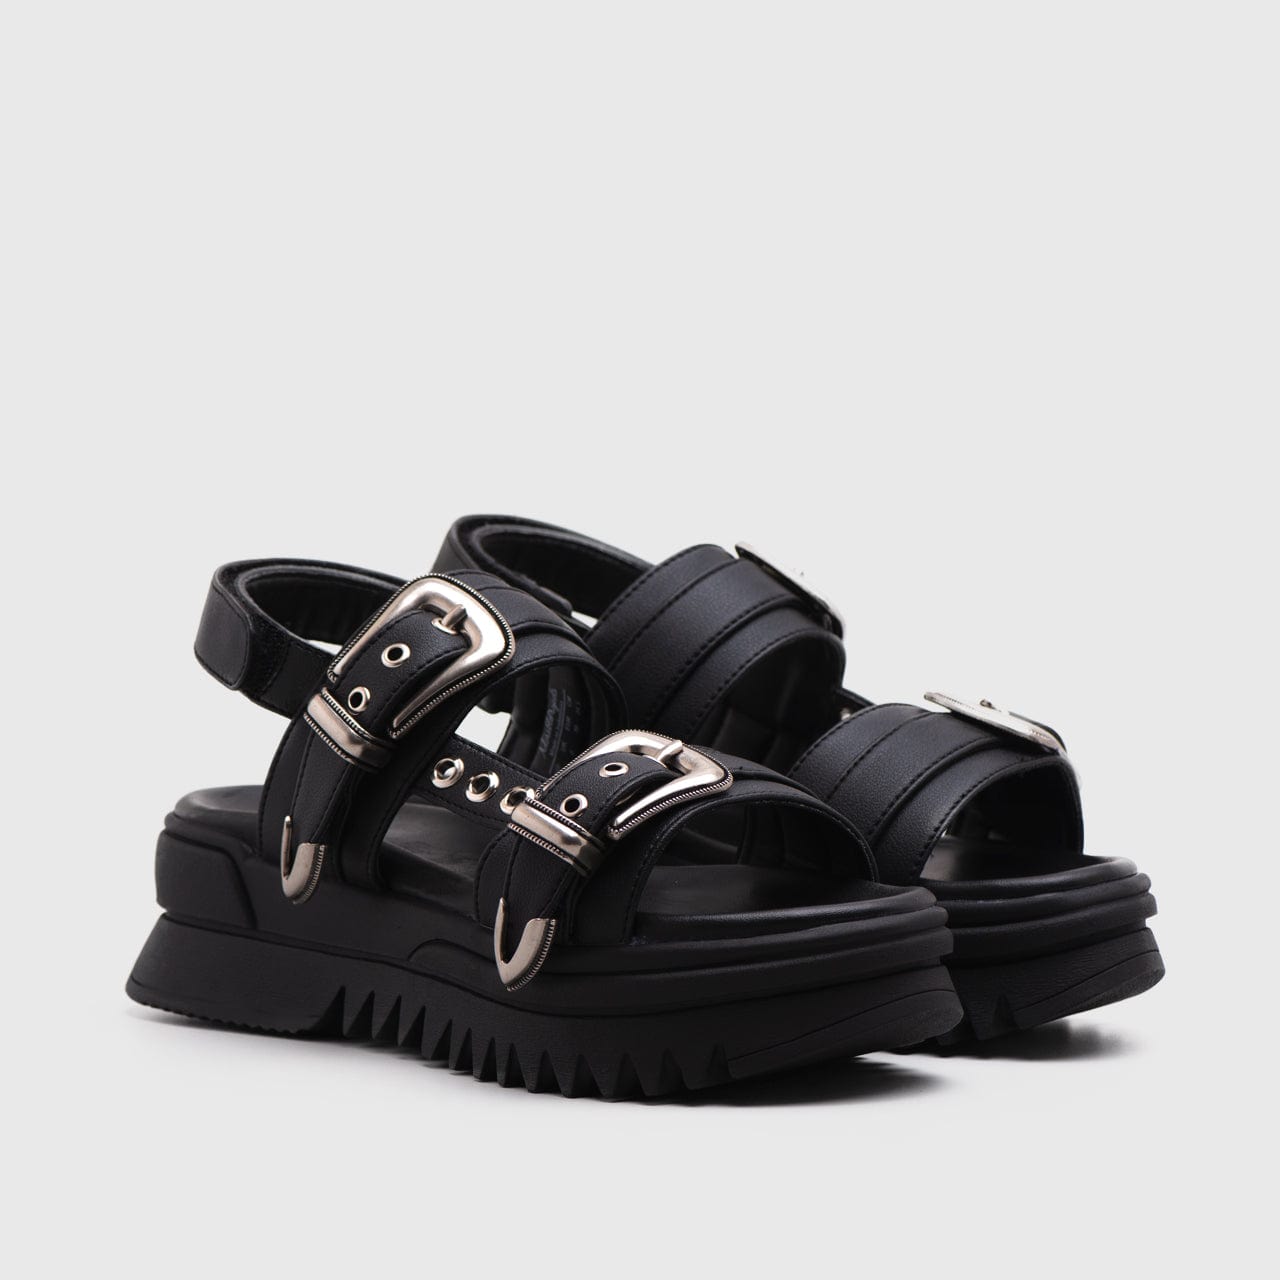 Adorable Projects Official 39 Adorableprojects - Bowline Sandals Black - Sendal Wanita